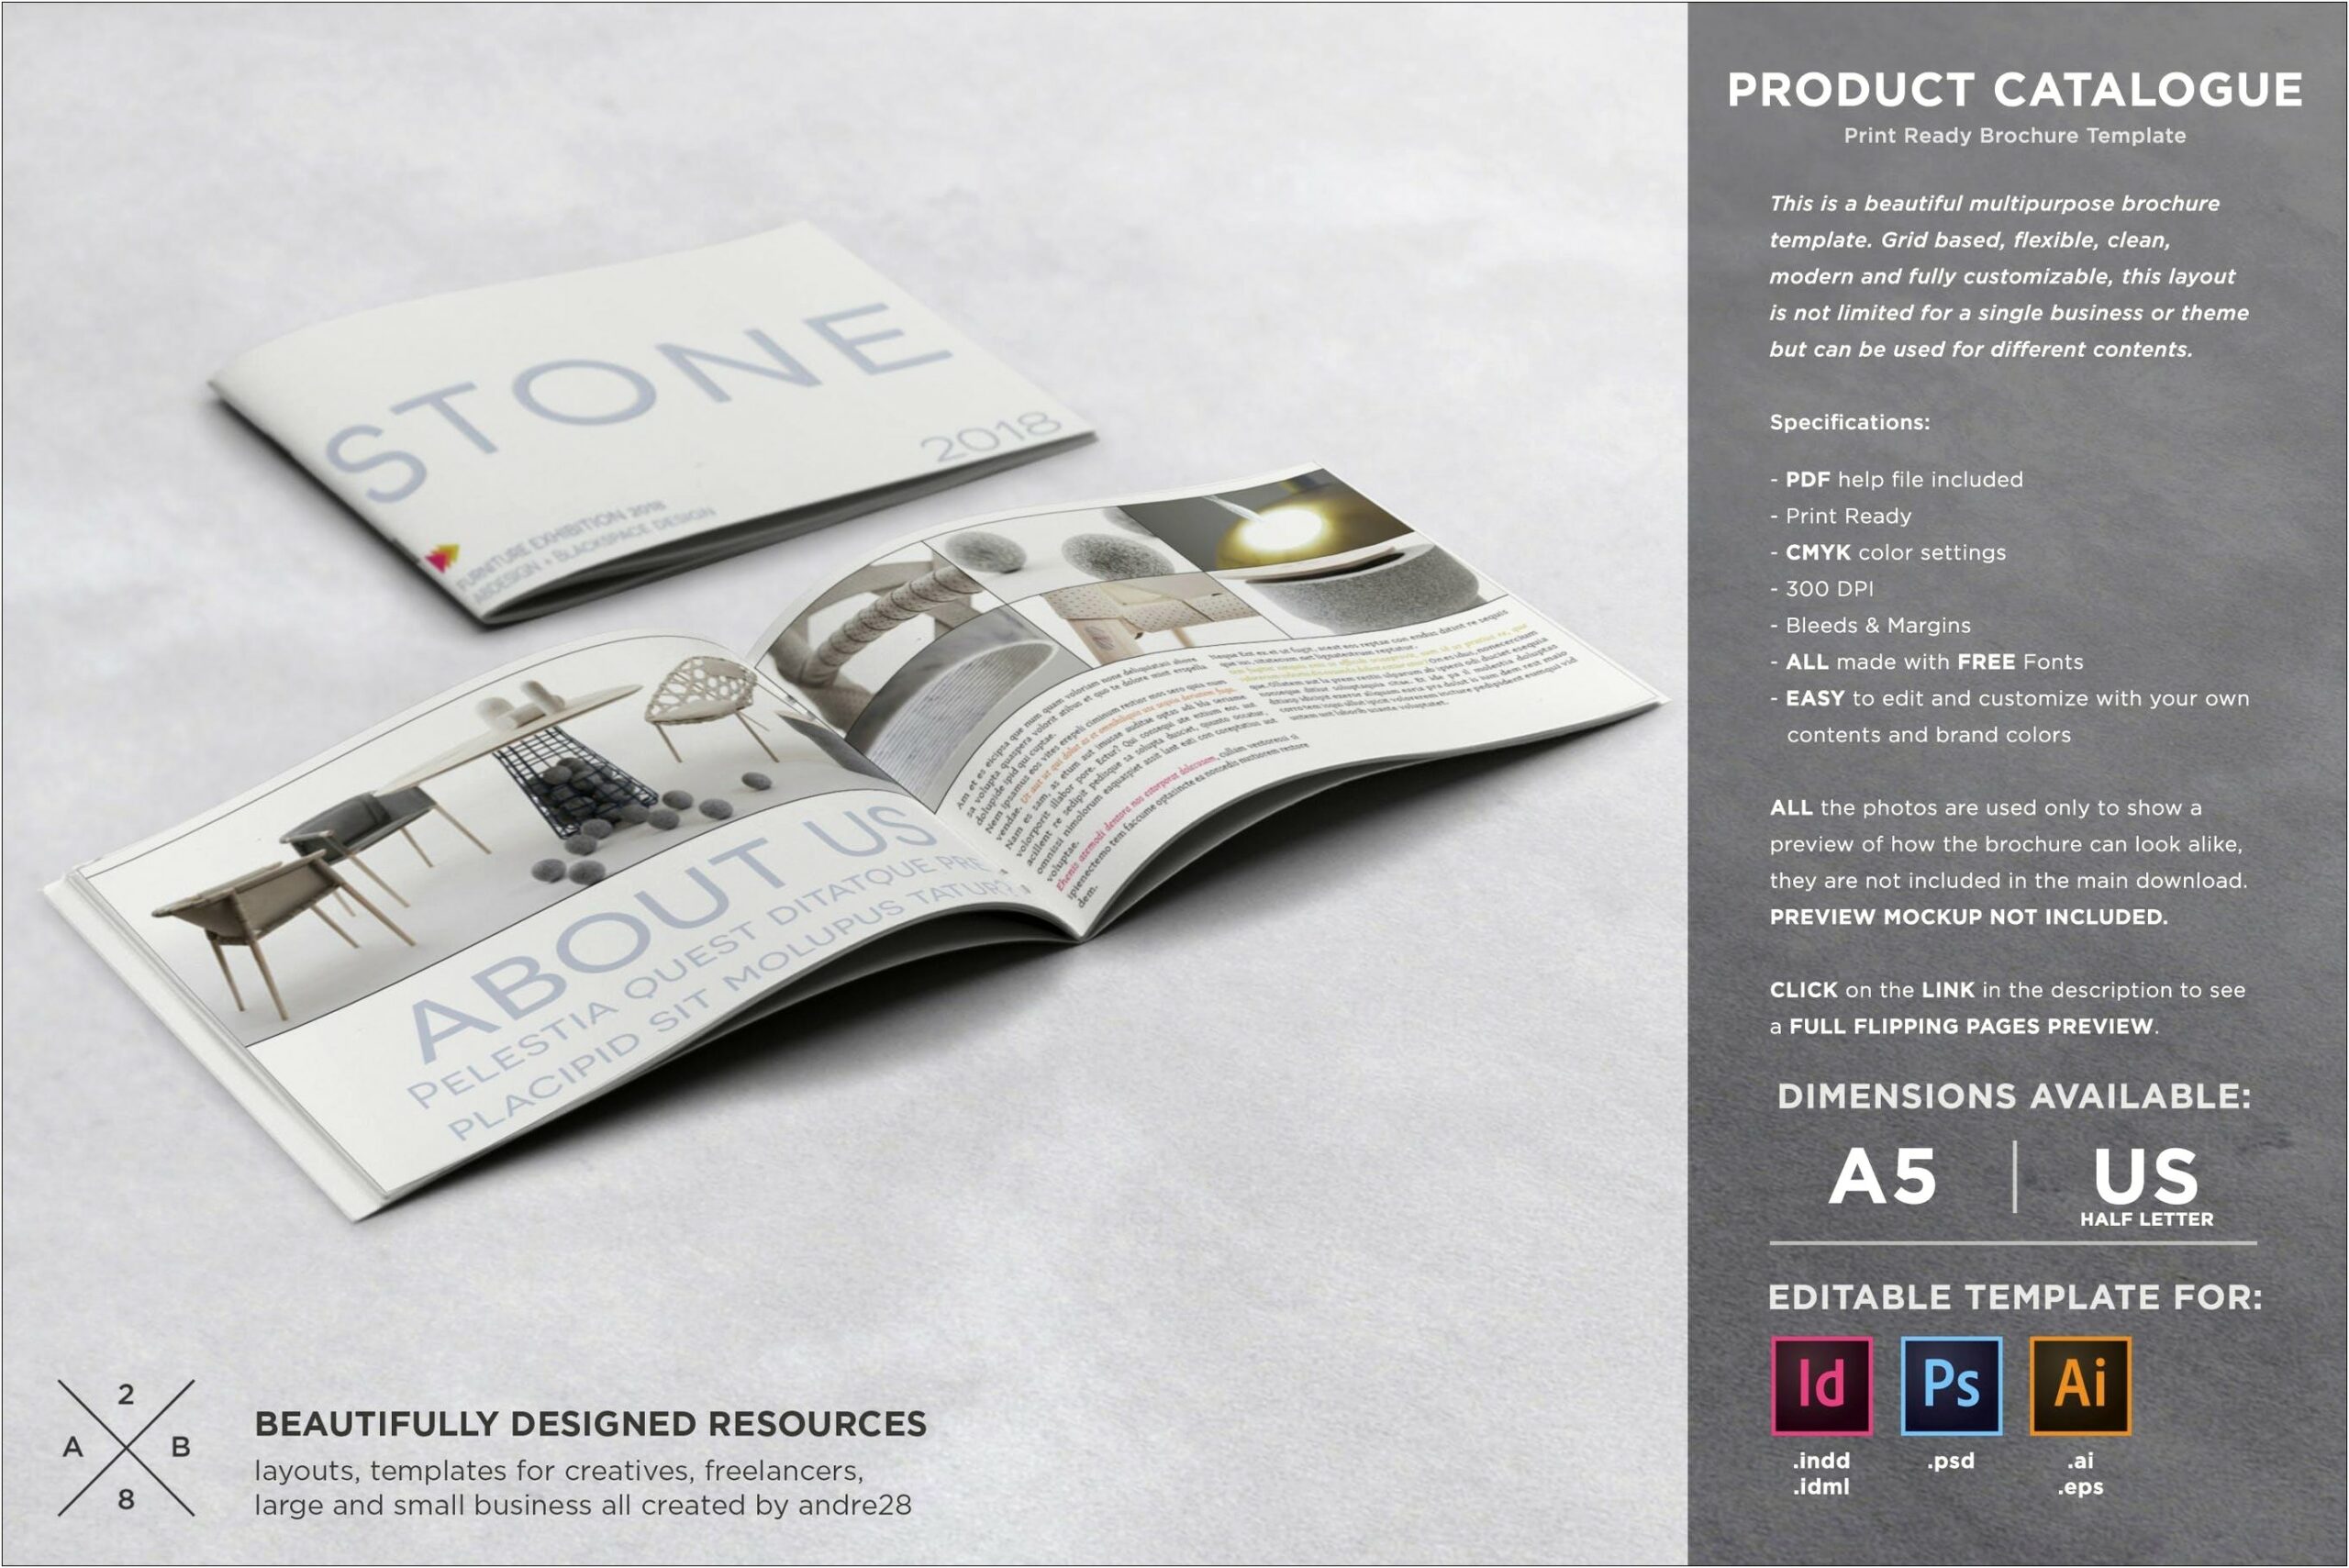 Product Catalogue Template Psd Free Download